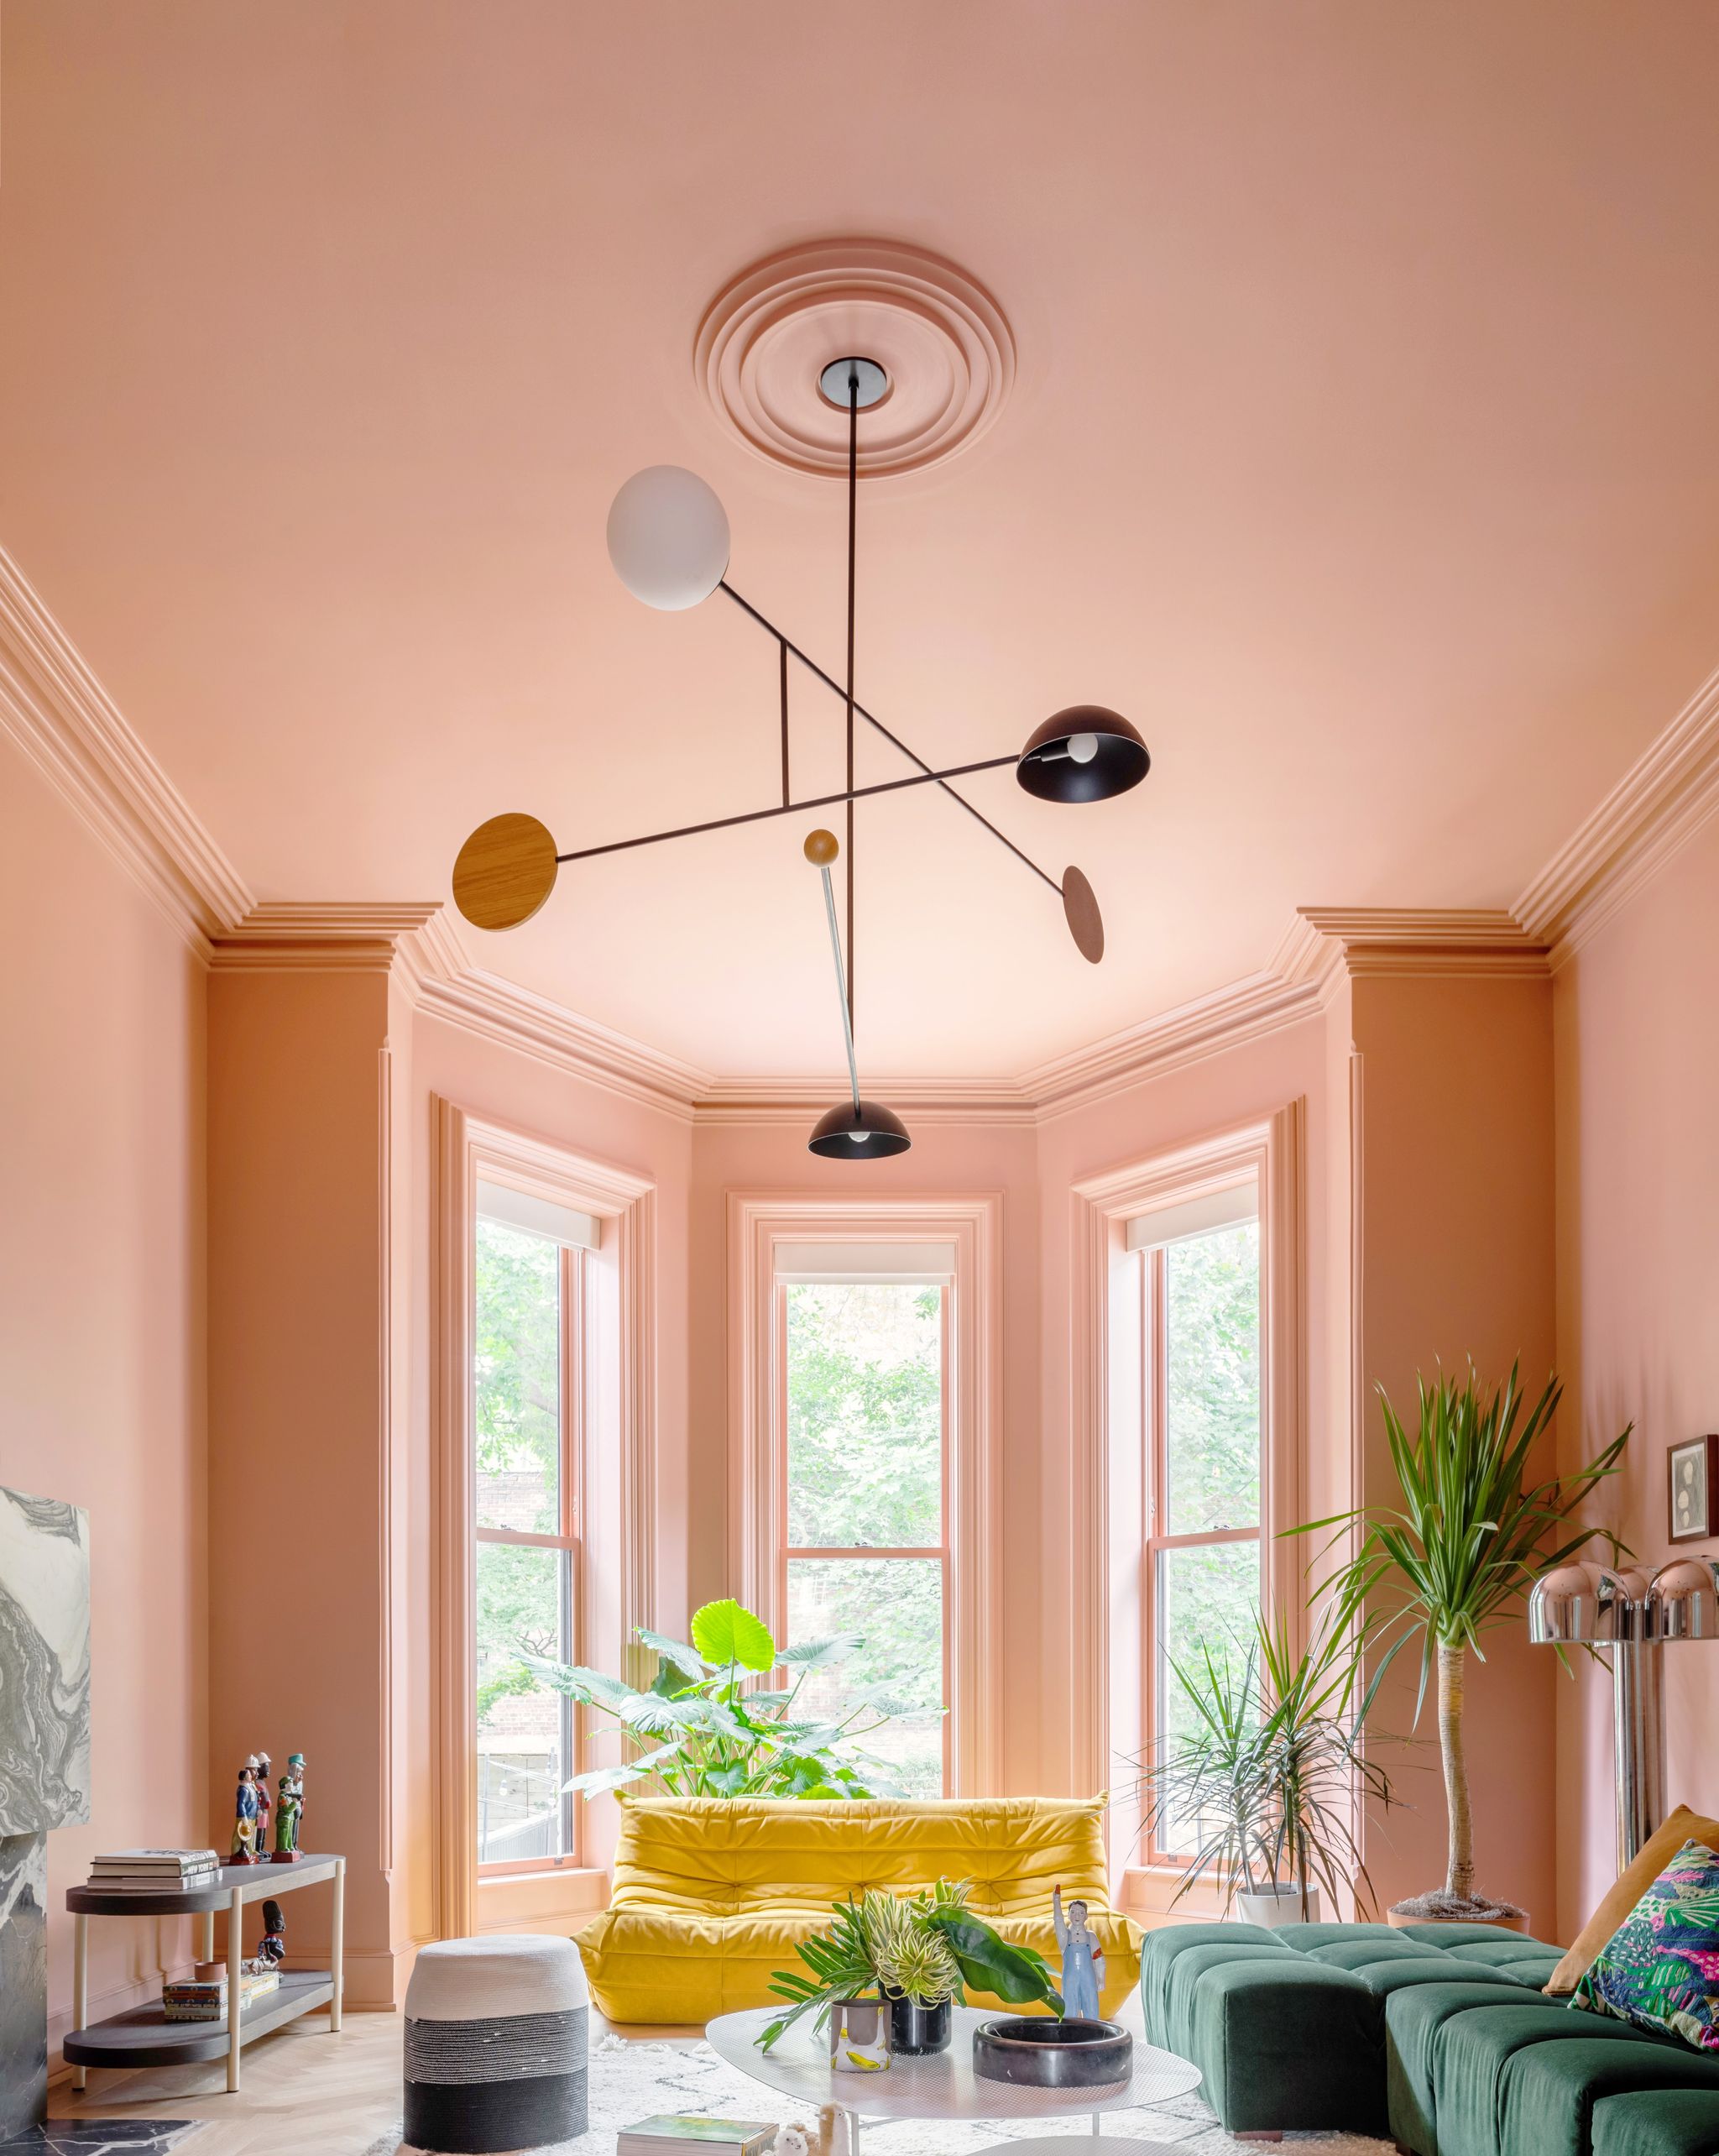 Wes Anderson home decor ideas to get the iconic look